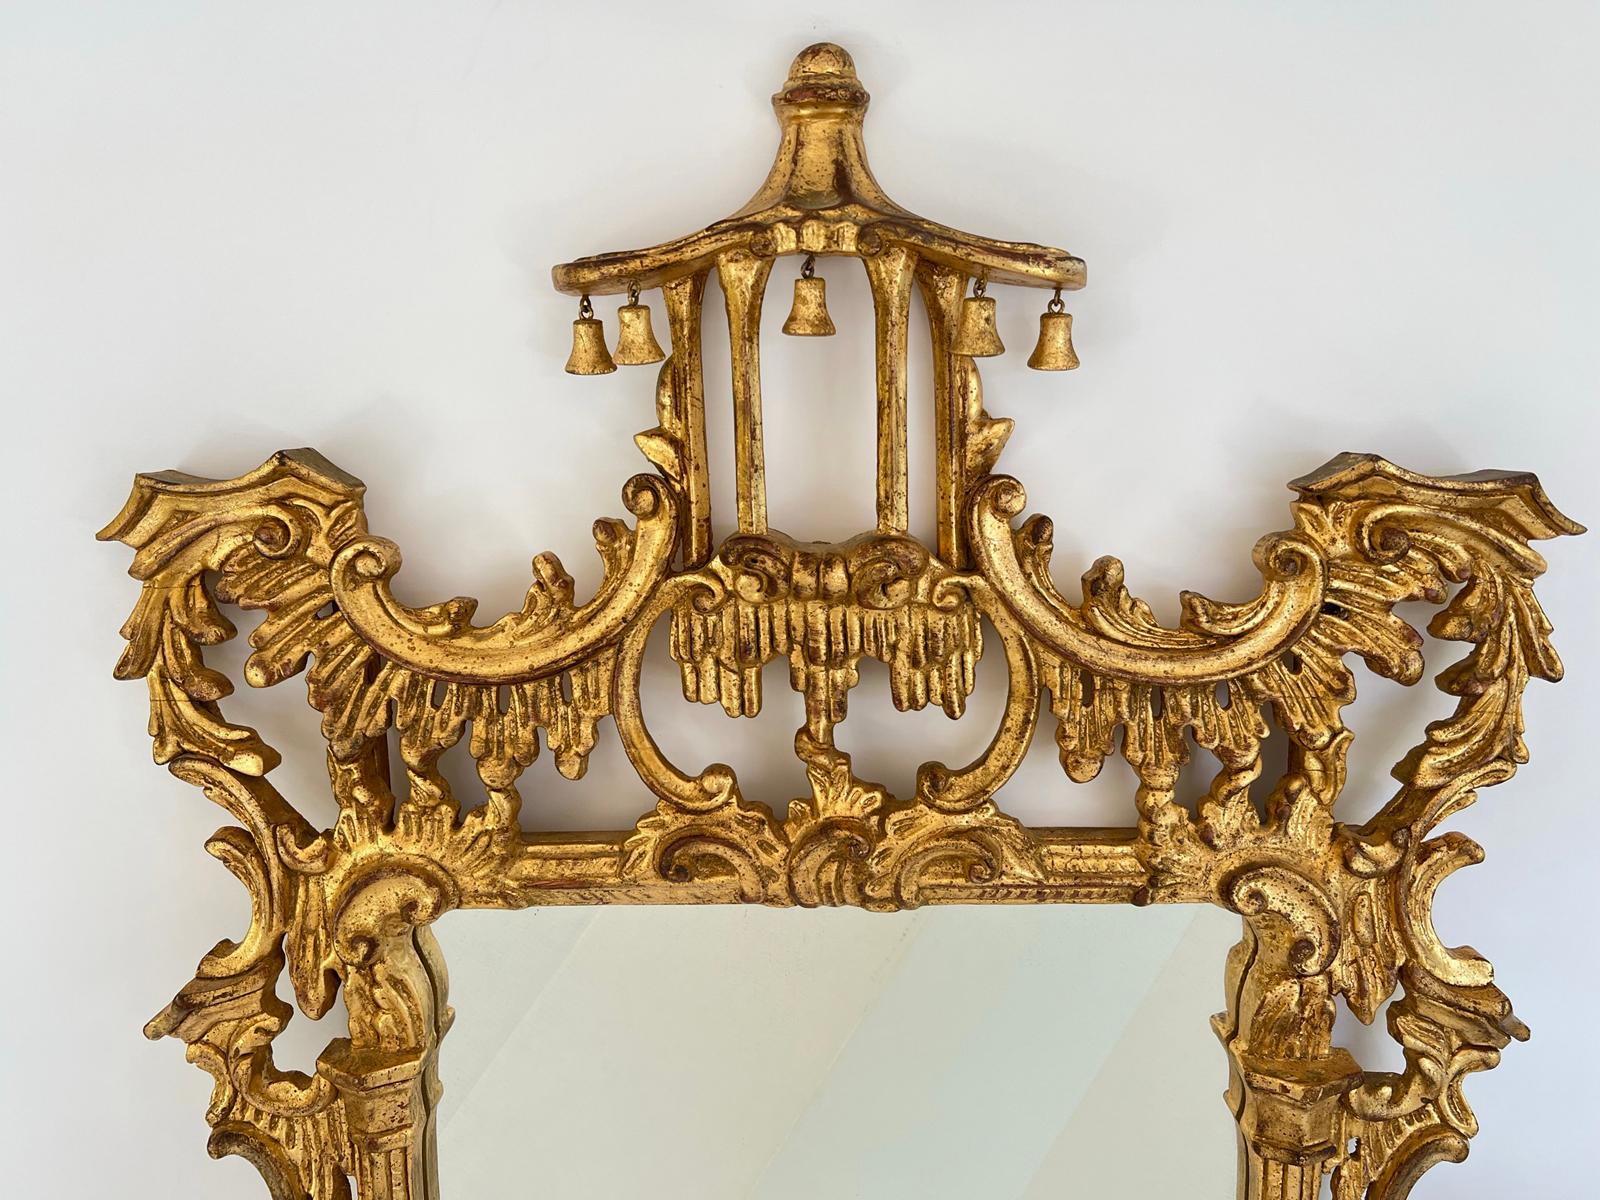 Wall mirror of carved giltwood; in the Brighton Pavilion style, having an elaborate hand-carved, pierced frame, surmounted by a pagoda pediment, and trimmed with wooden bells, its frame surrounded by carved C-scrolls and foliate reliefs.

Stock ID: